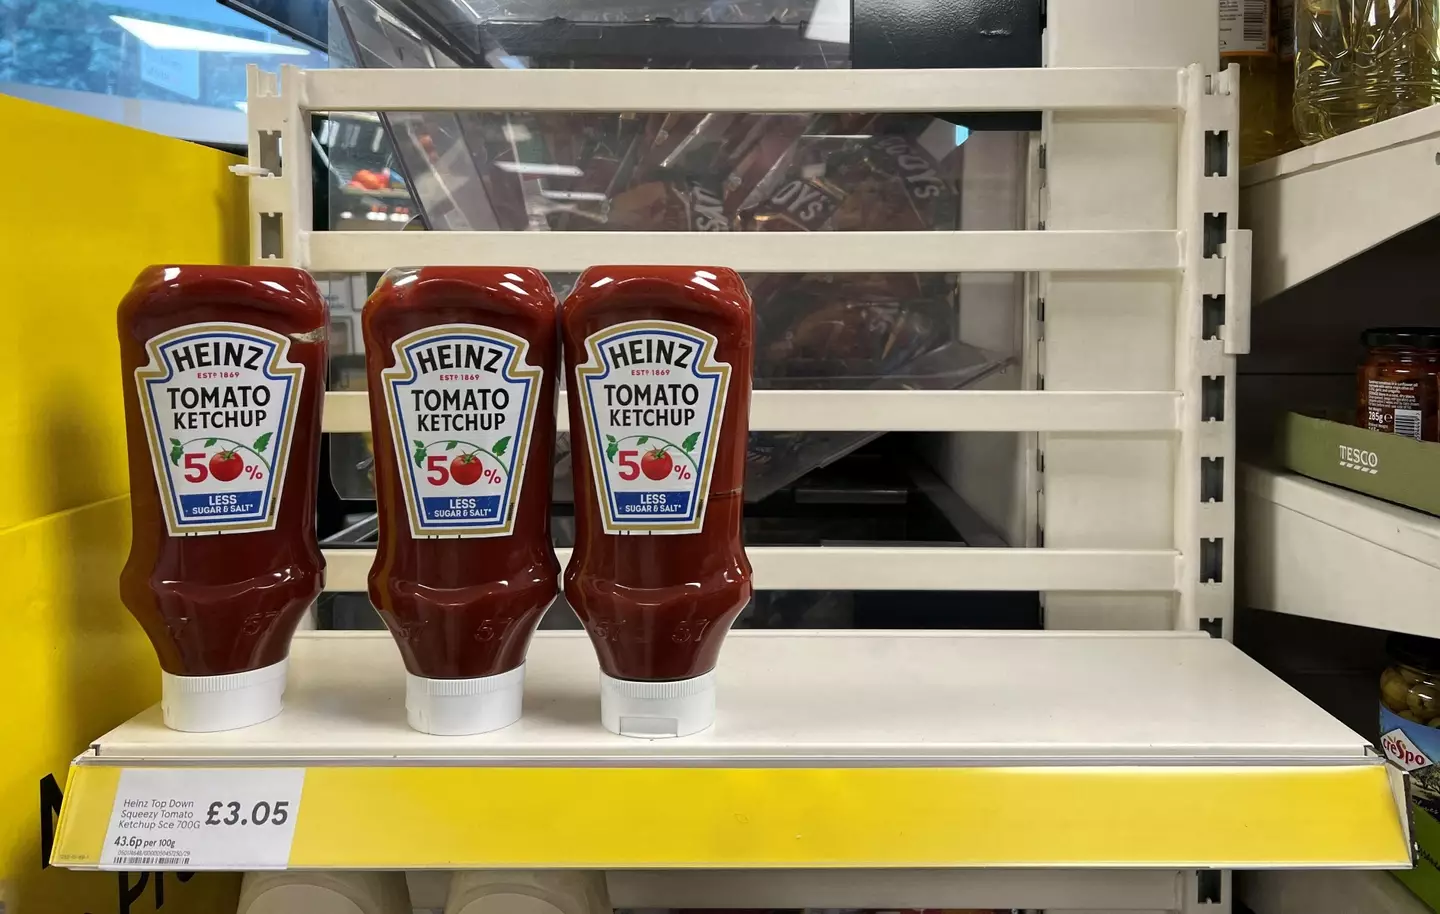 Tesco shelves were depleted of Heinz products.